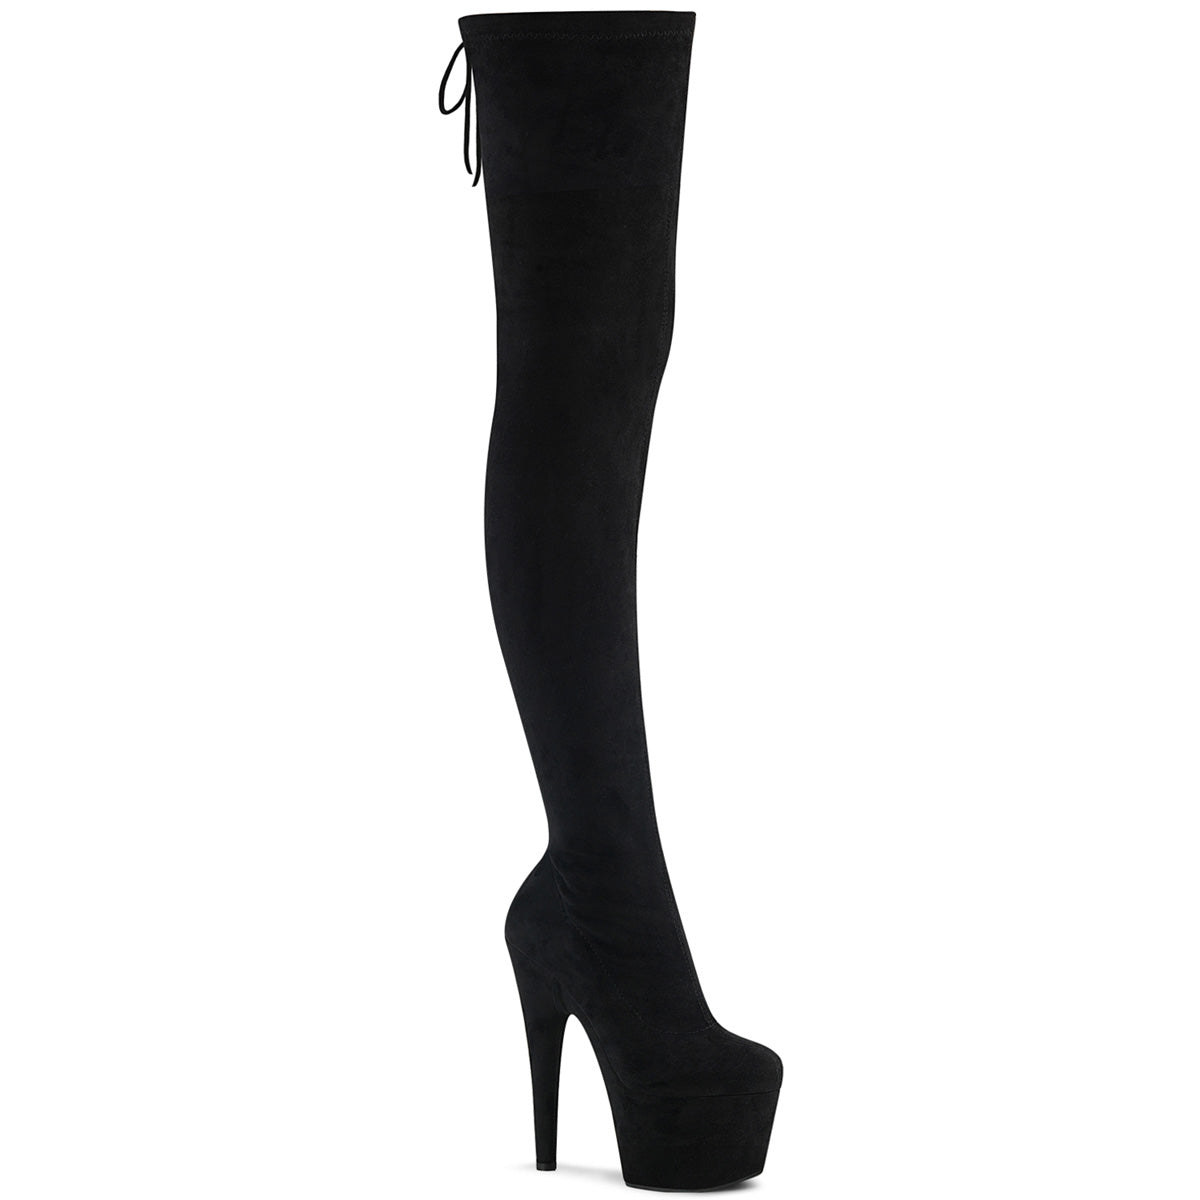 Pleaser ADORE-3008 Black Stretch Faux Suede 7 Inch Heel, 2 3/4 Inch Platform Stretch Pull-On Thigh High Boot